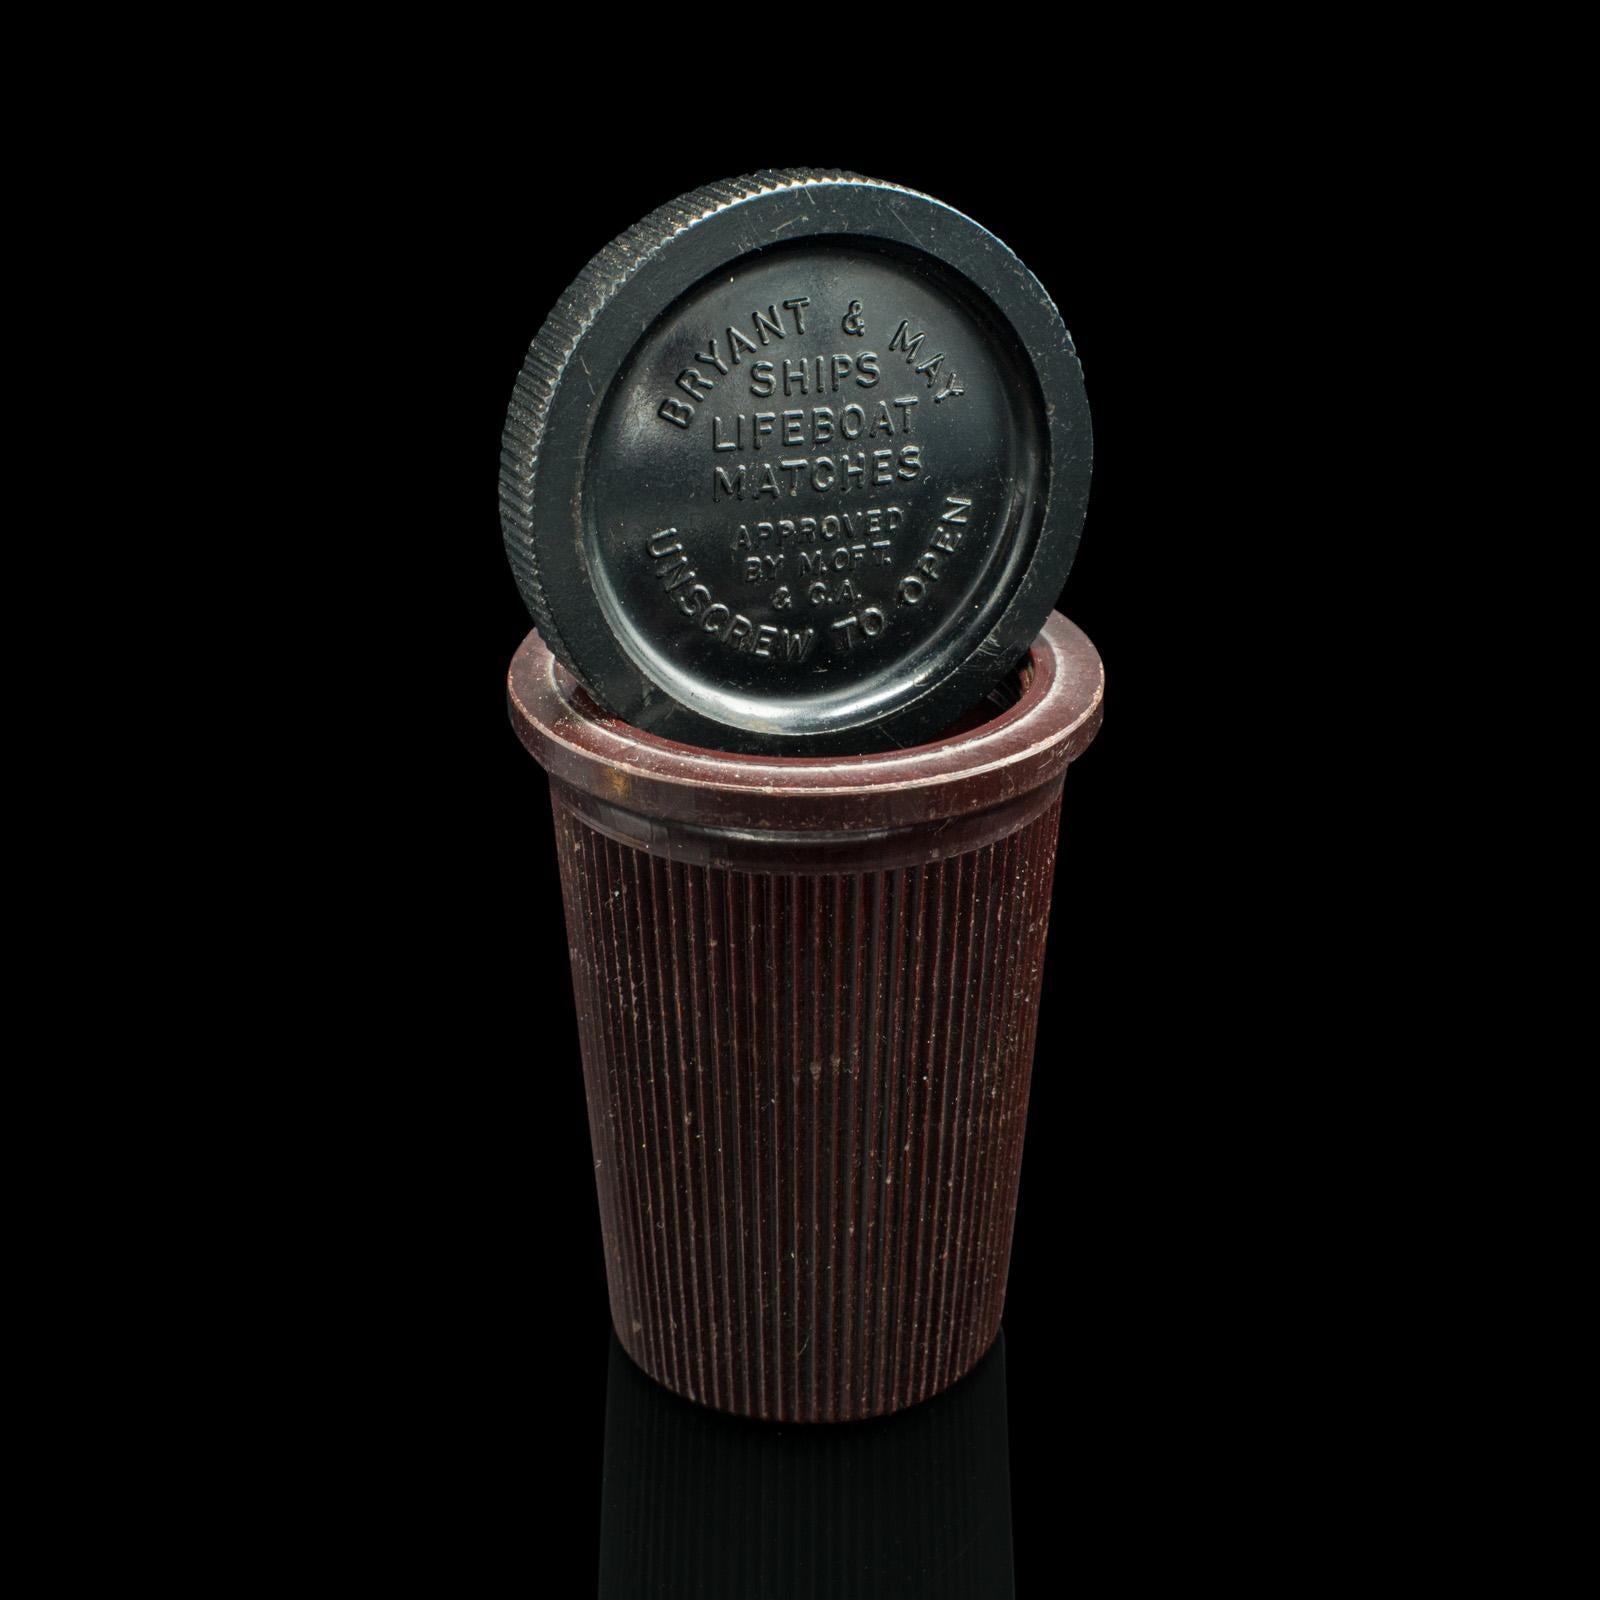 Vintage Match Pot, English, Bakelite, Bryant & May Matchstick Case, Circa 1930 For Sale 3